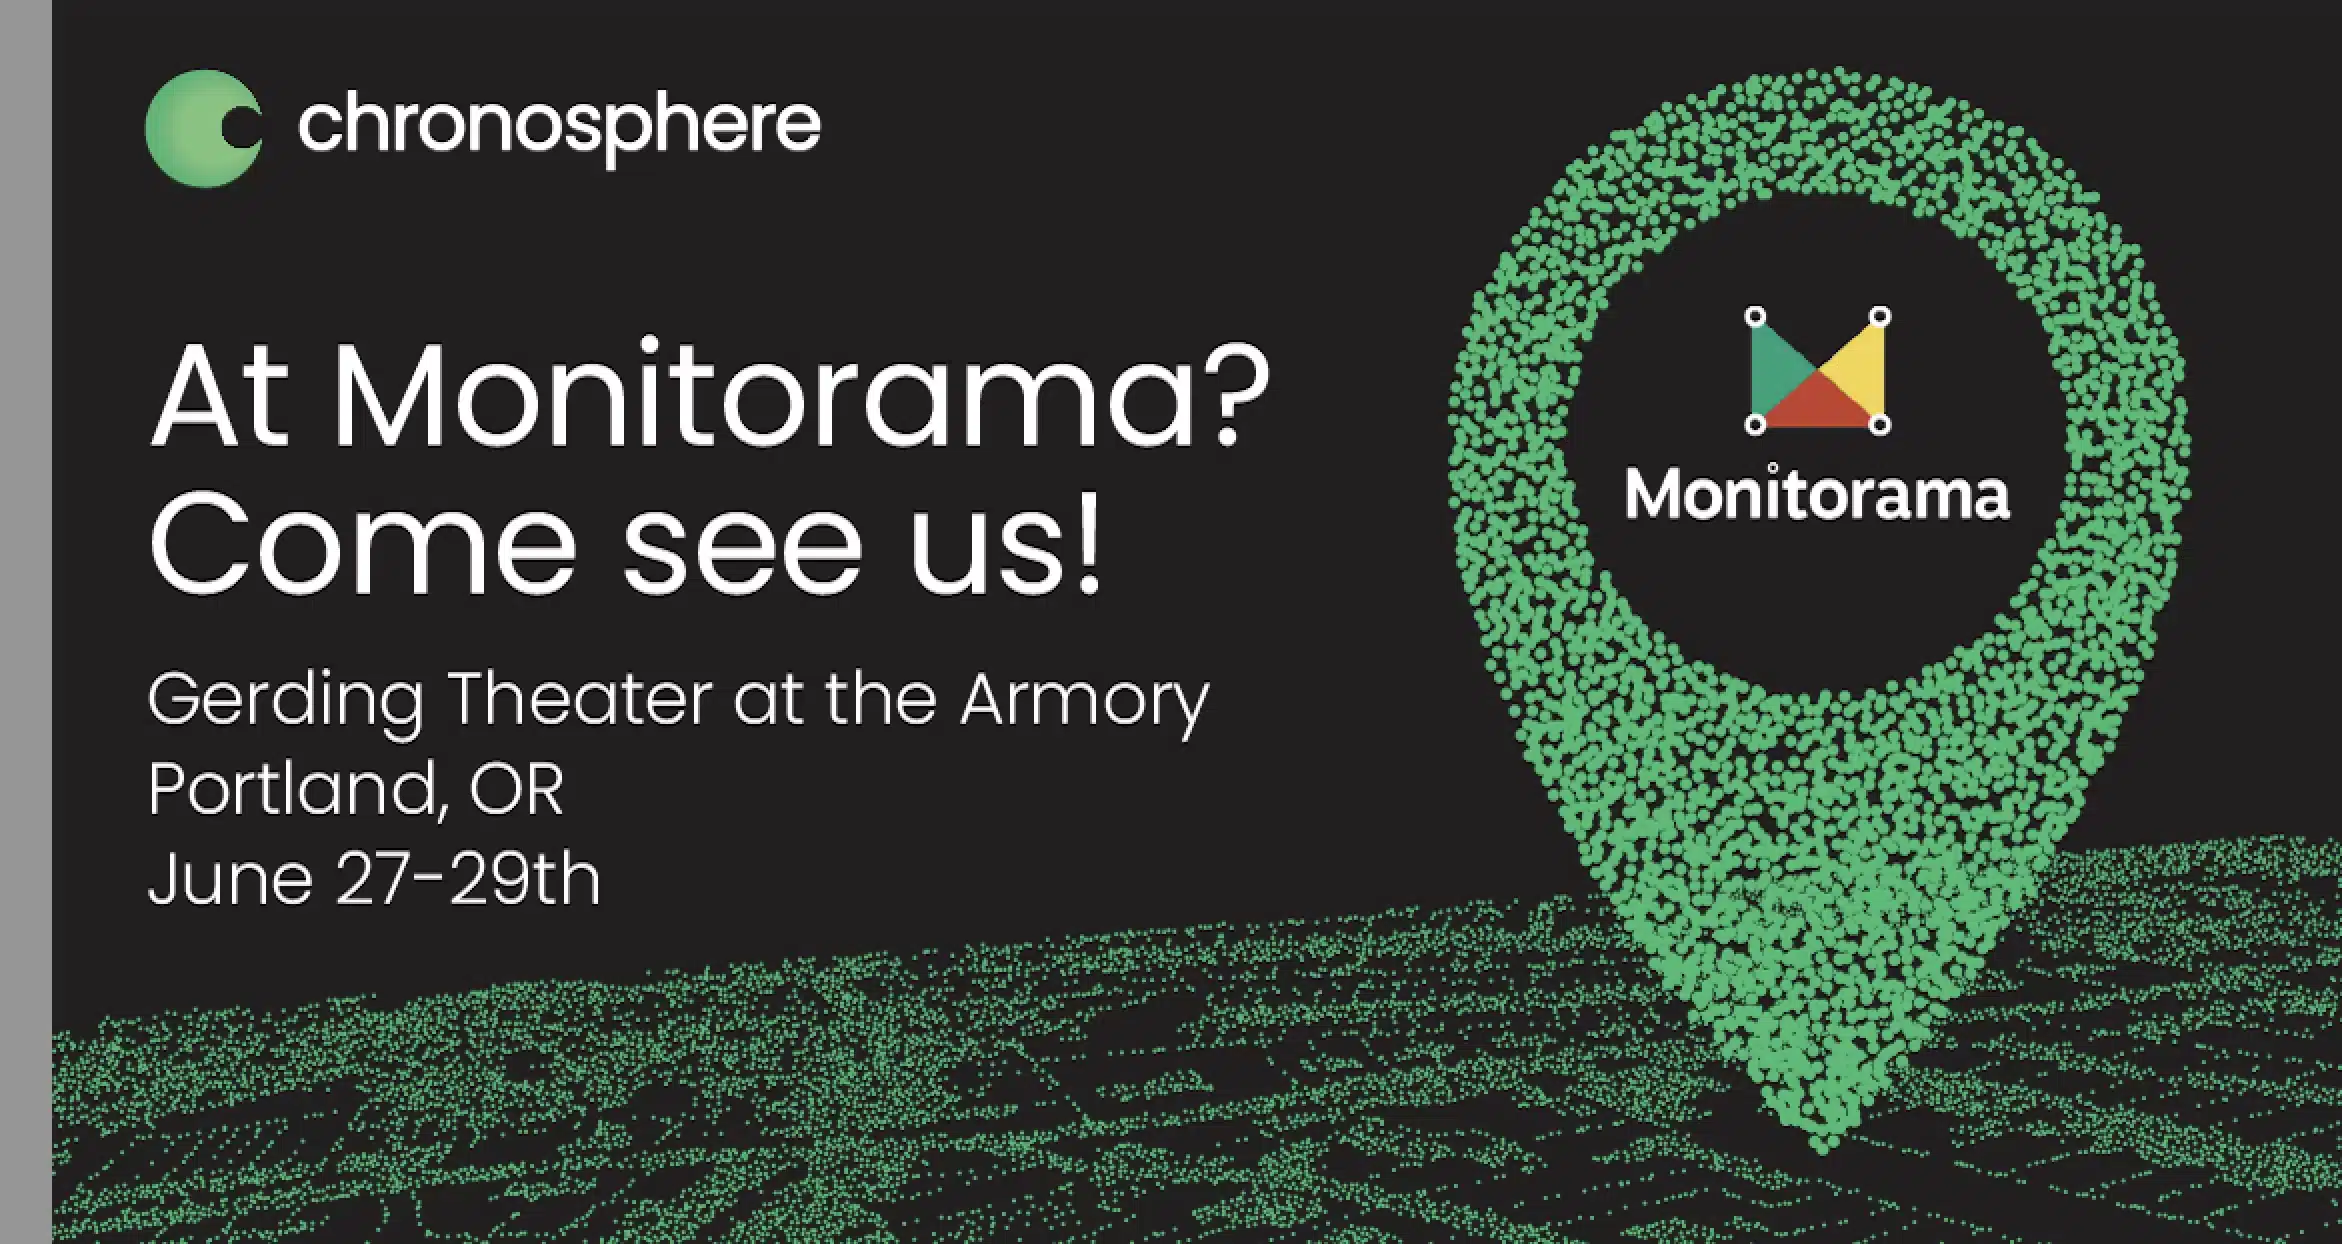 A Monitorama 2022 poster inviting attendees to come see us, featuring the words "monitorama? come see us".